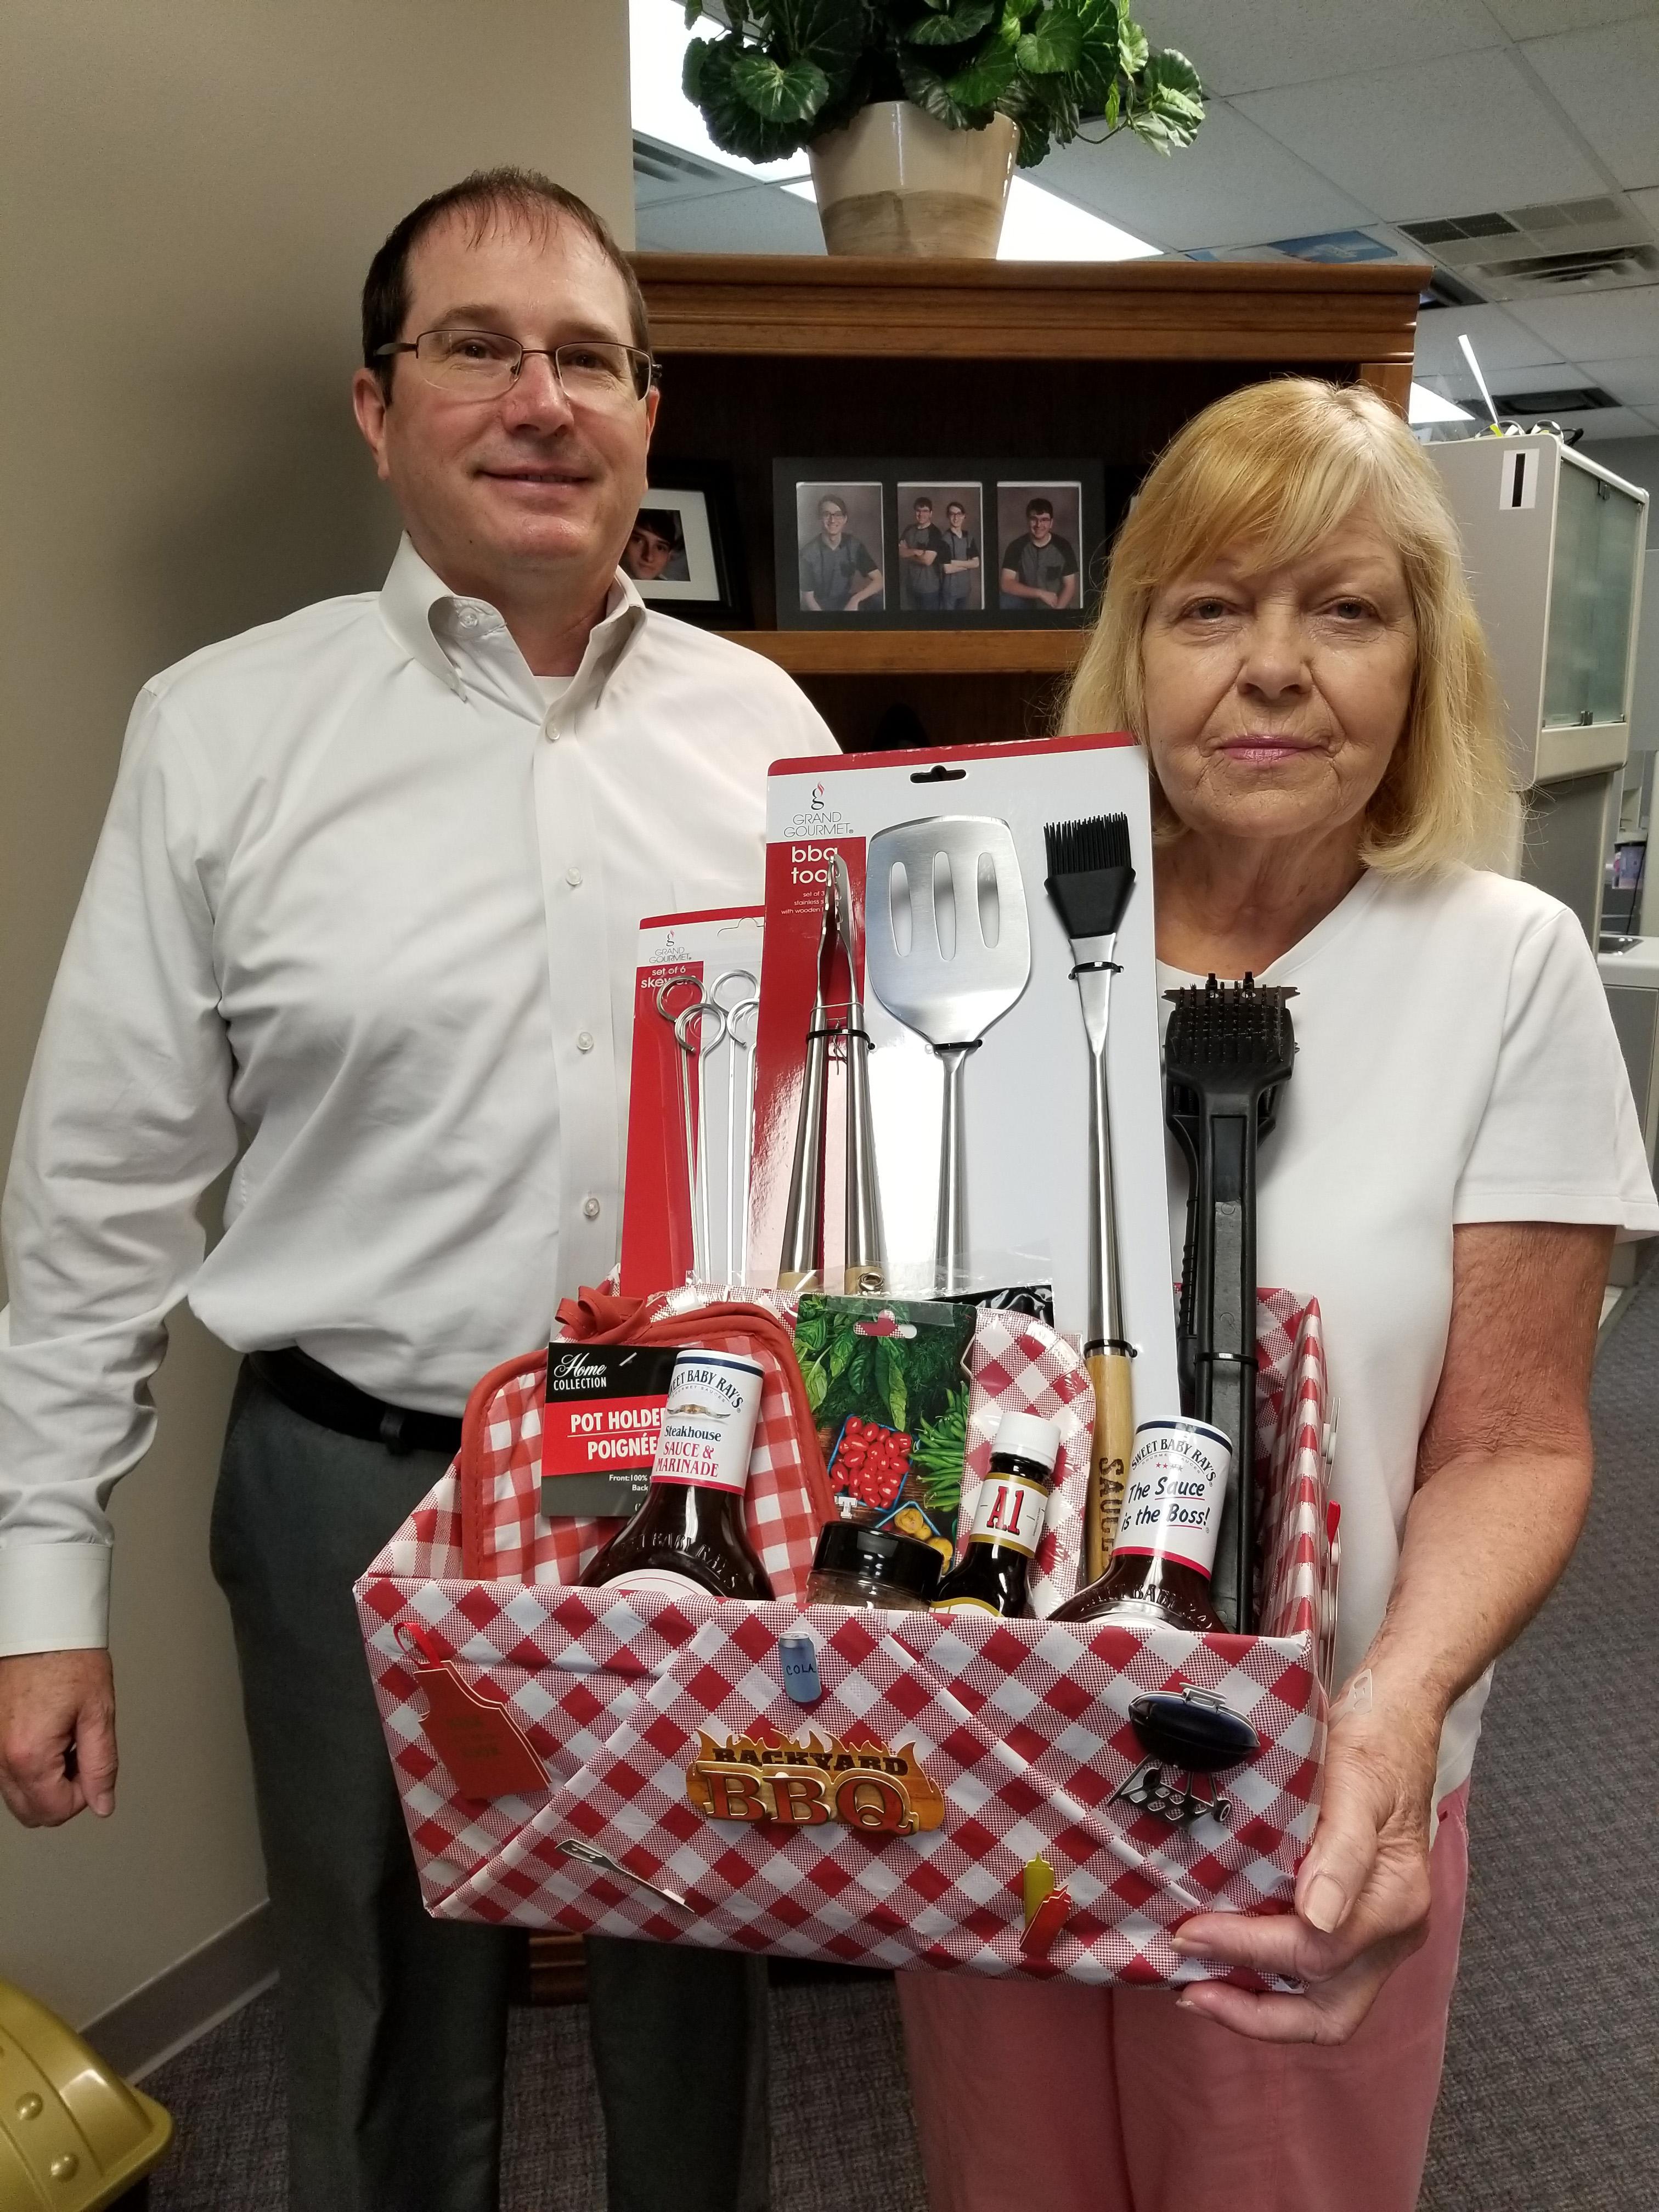 Congratulations to our lucky patient, Margaret. She was the winner of our Patient Appreciation Drawing for a BBQ Gift Basket held on August 13, 2018. She received an assortment of grilling supplies and a $25.00 gift card for Strack and Van Til.